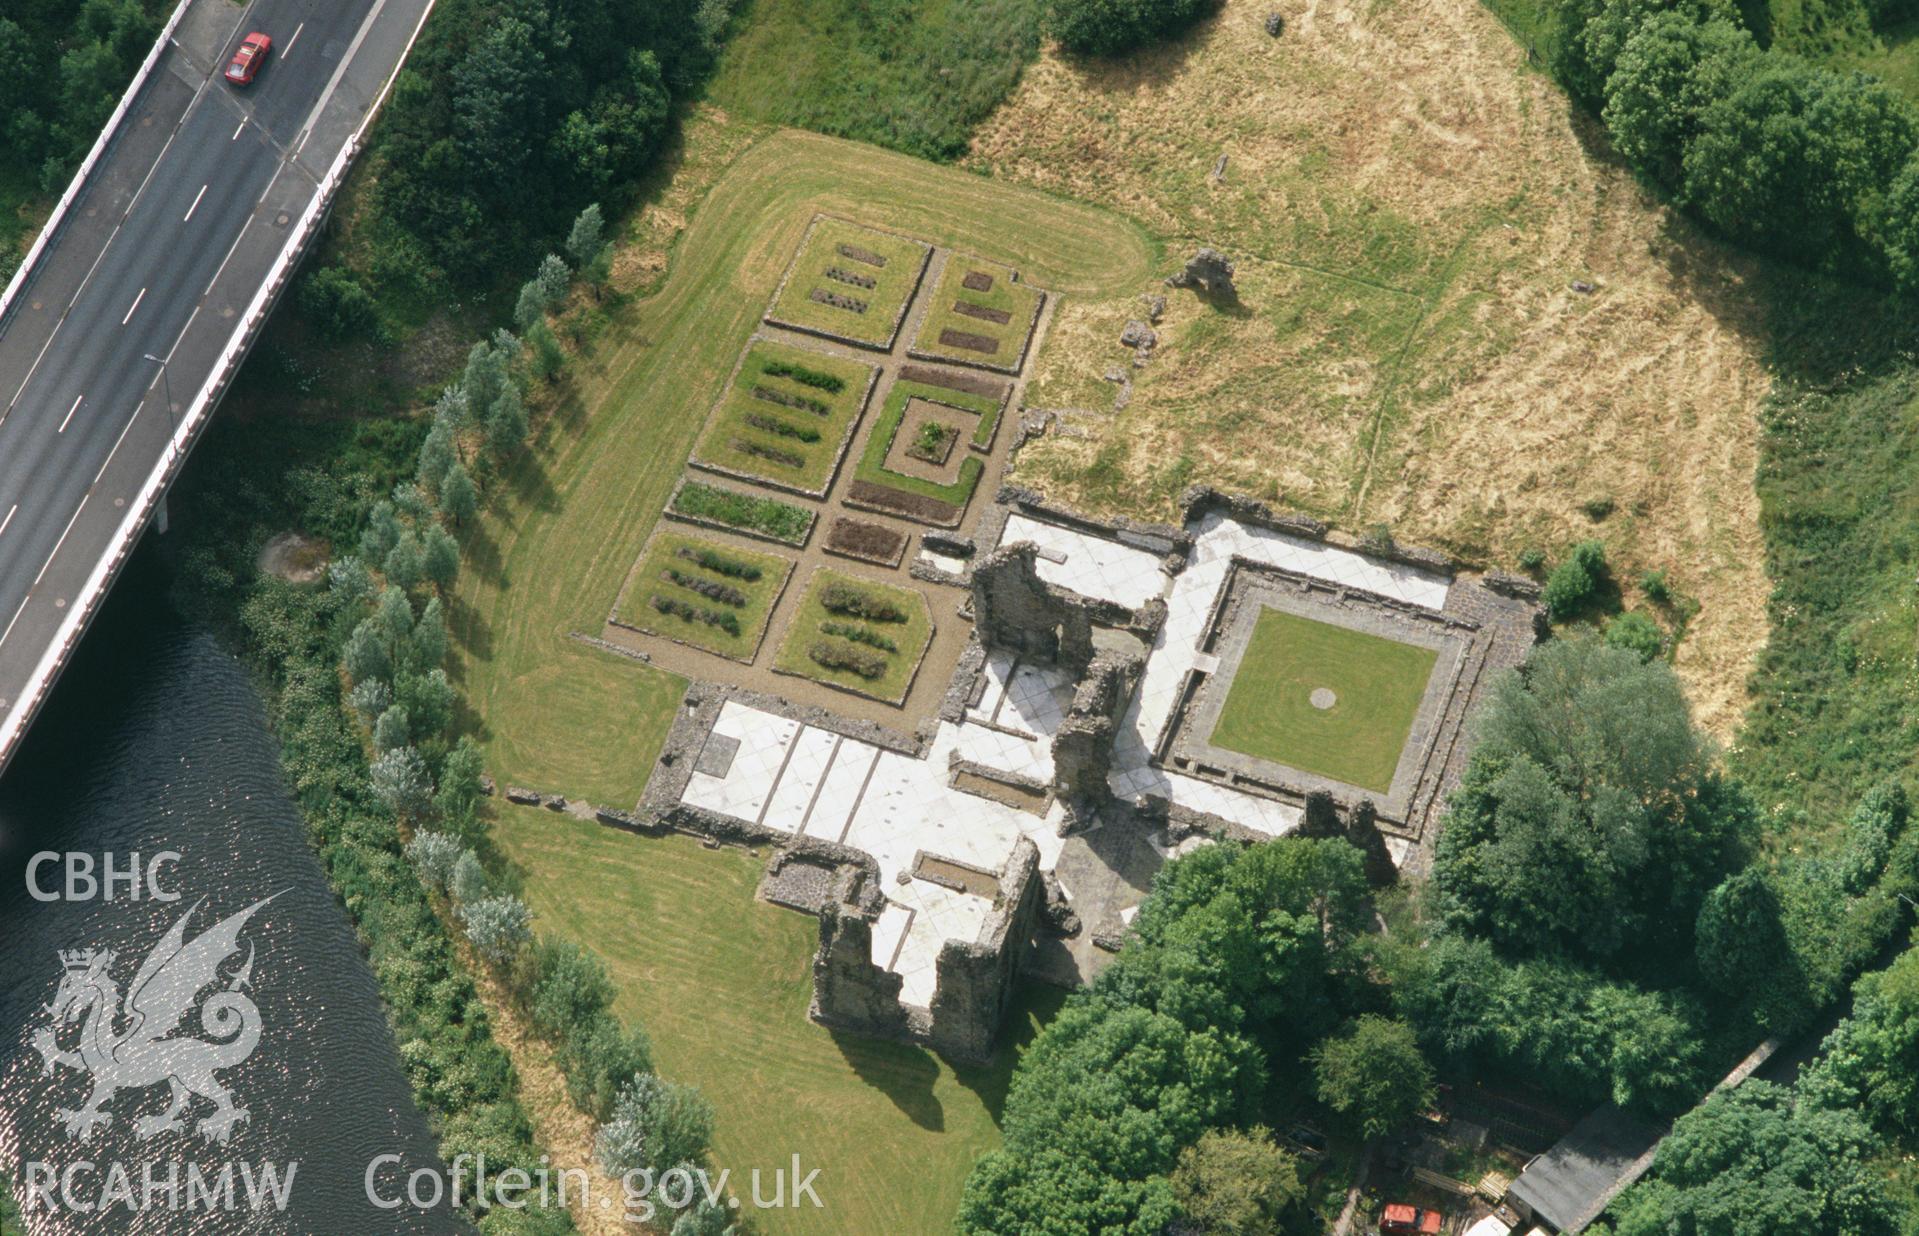 RCAHMW colour oblique aerial photograph of Haverfordwest Priory. Taken by Toby Driver on 28/06/2002